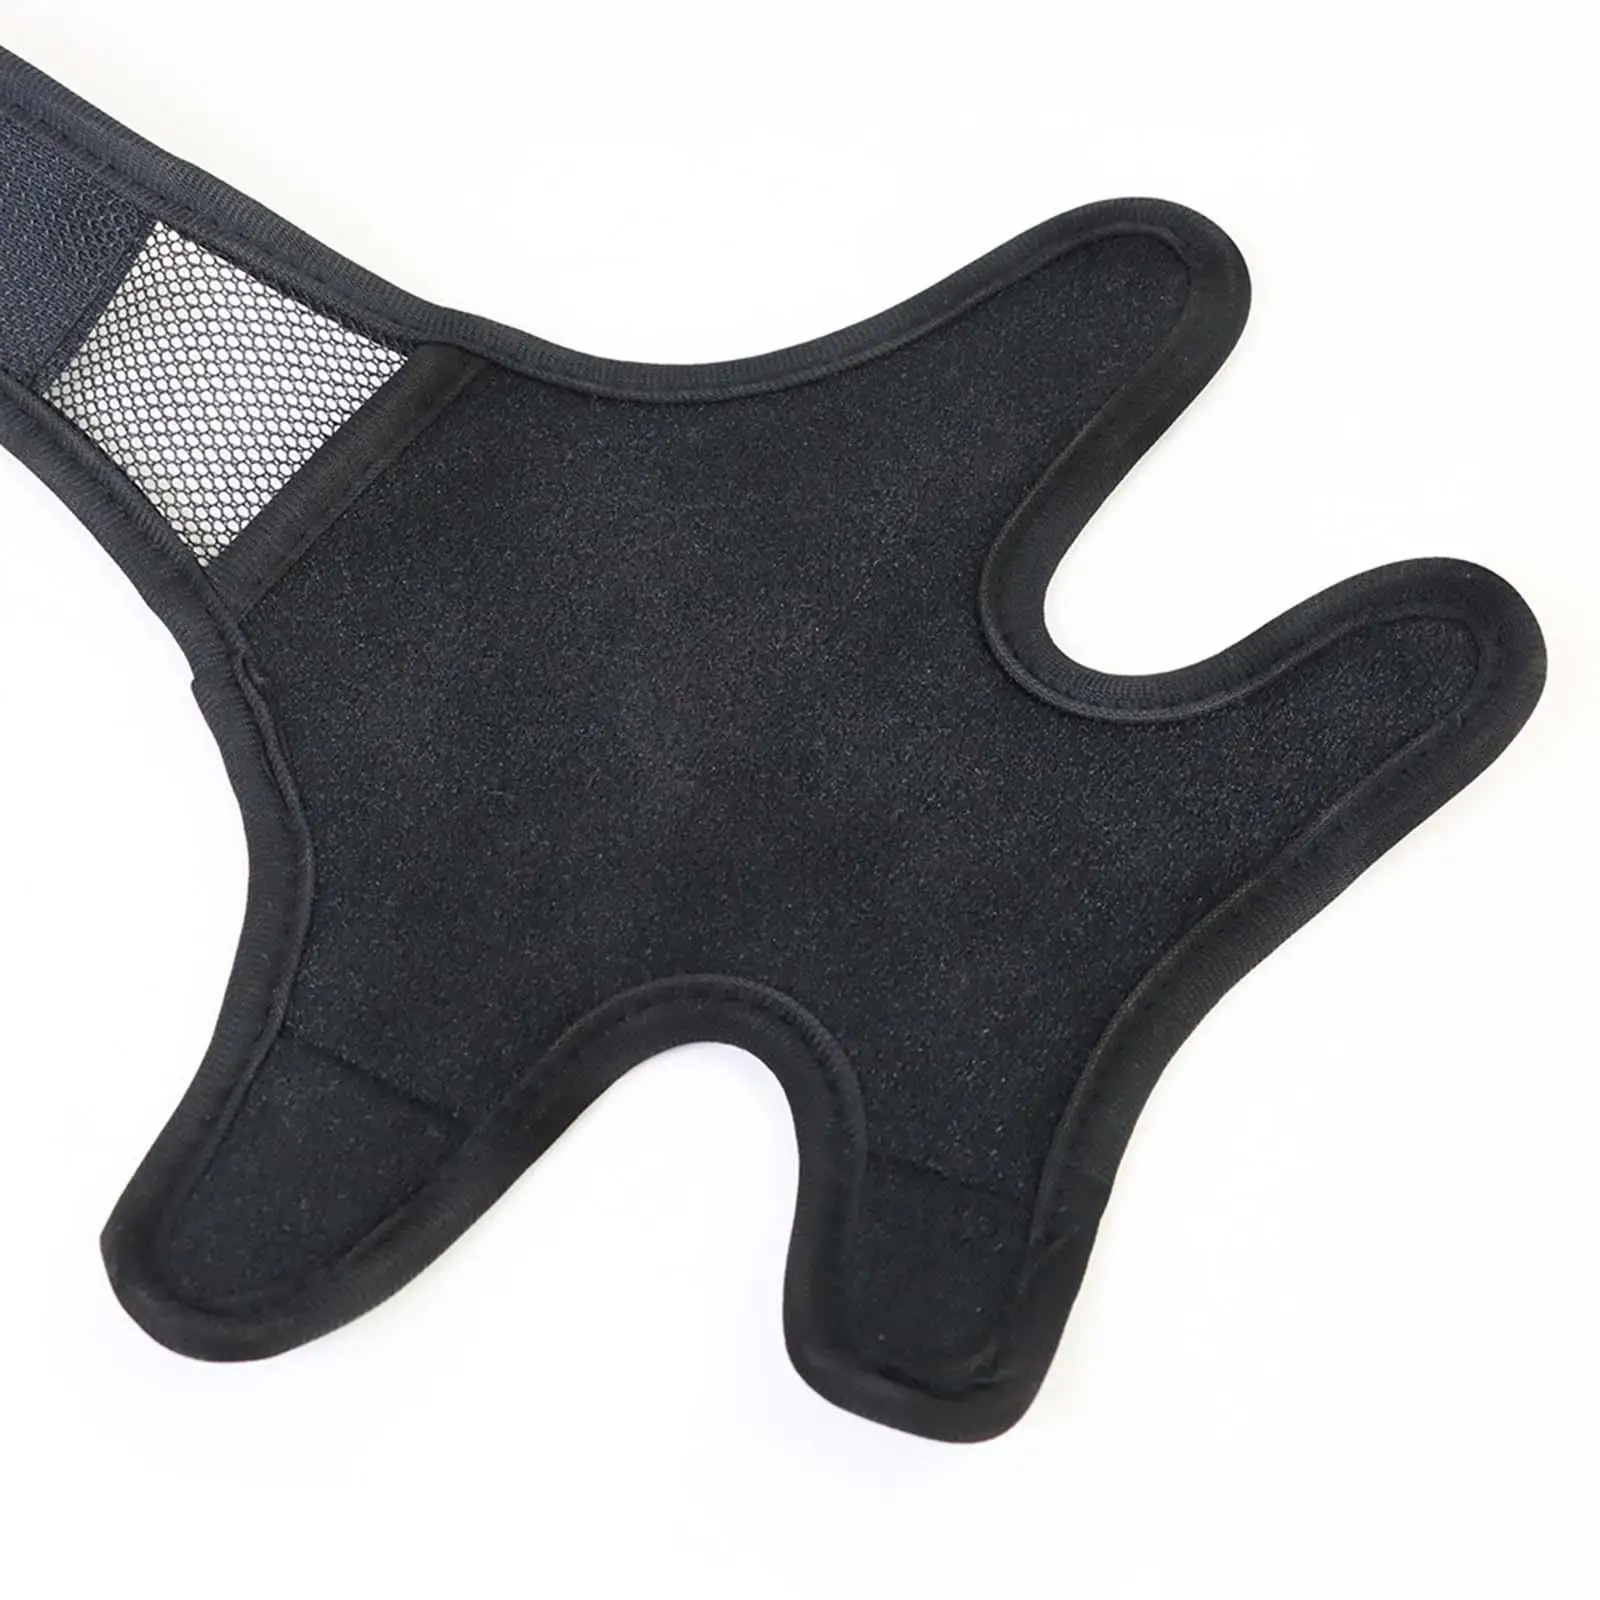 Dog Knee Brace for Old, Disabled, Joint Injuries, Dogs Helper Joint Support